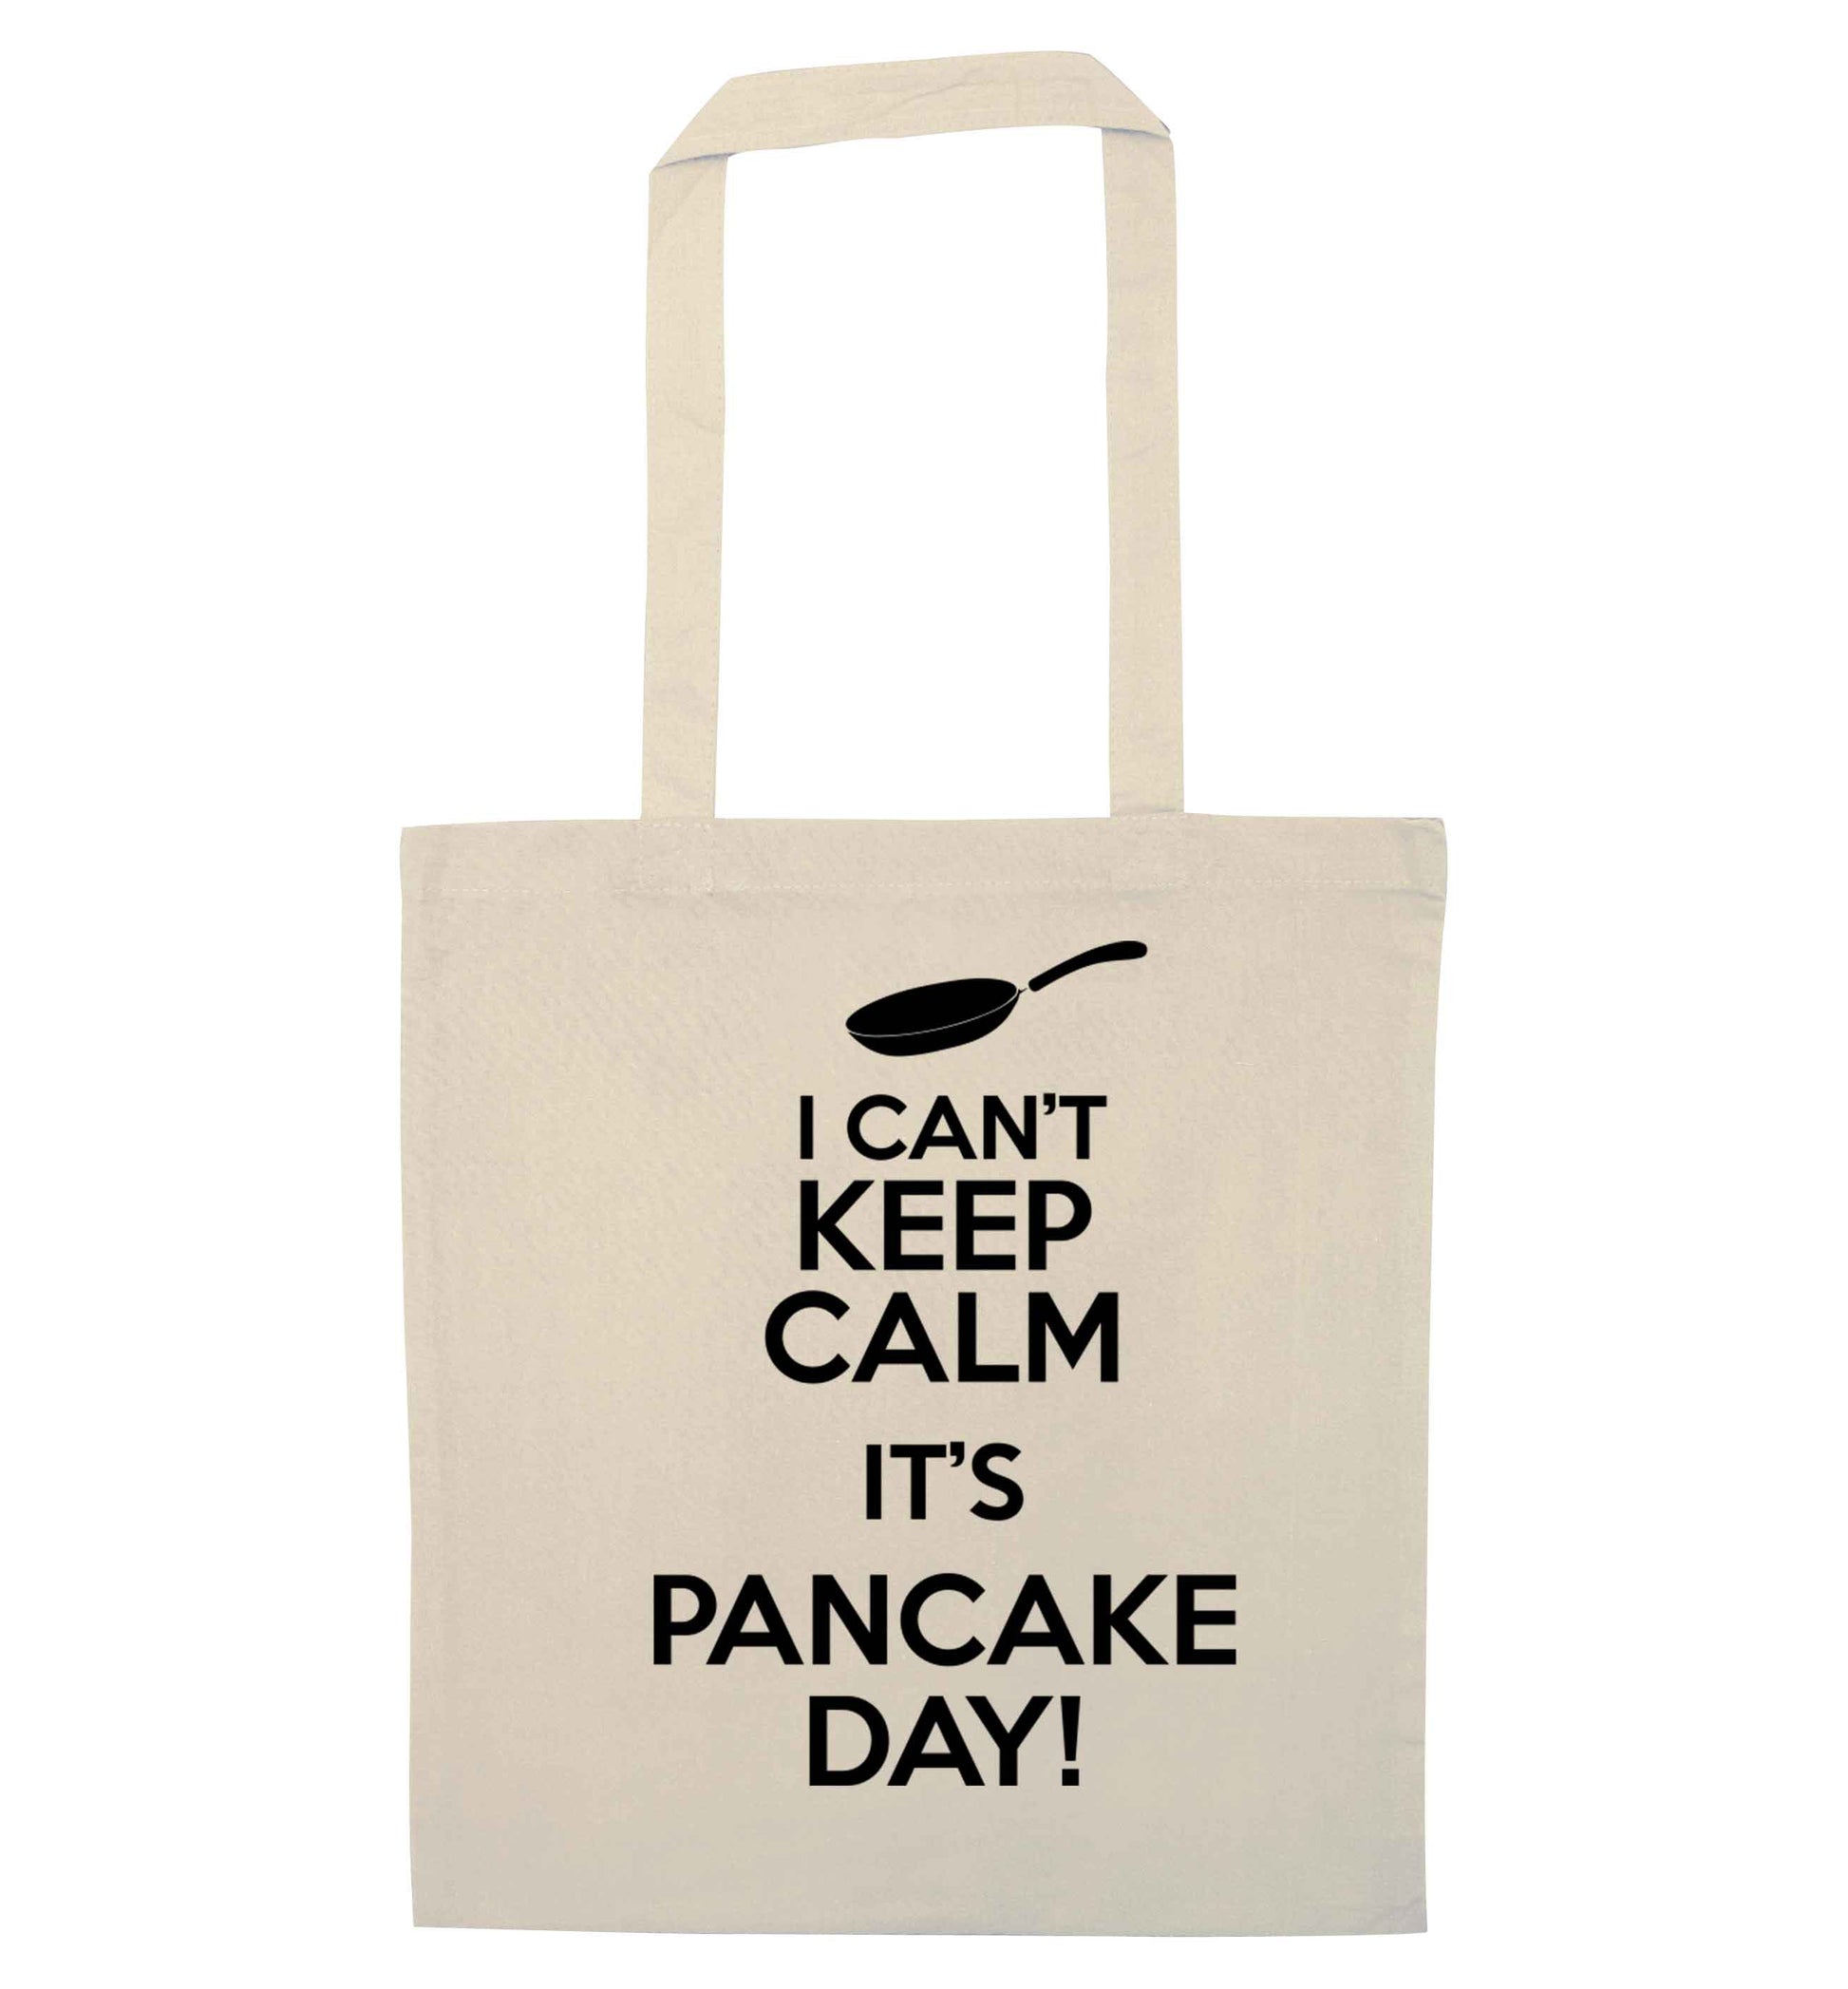 I can't keep calm it's pancake day! natural tote bag